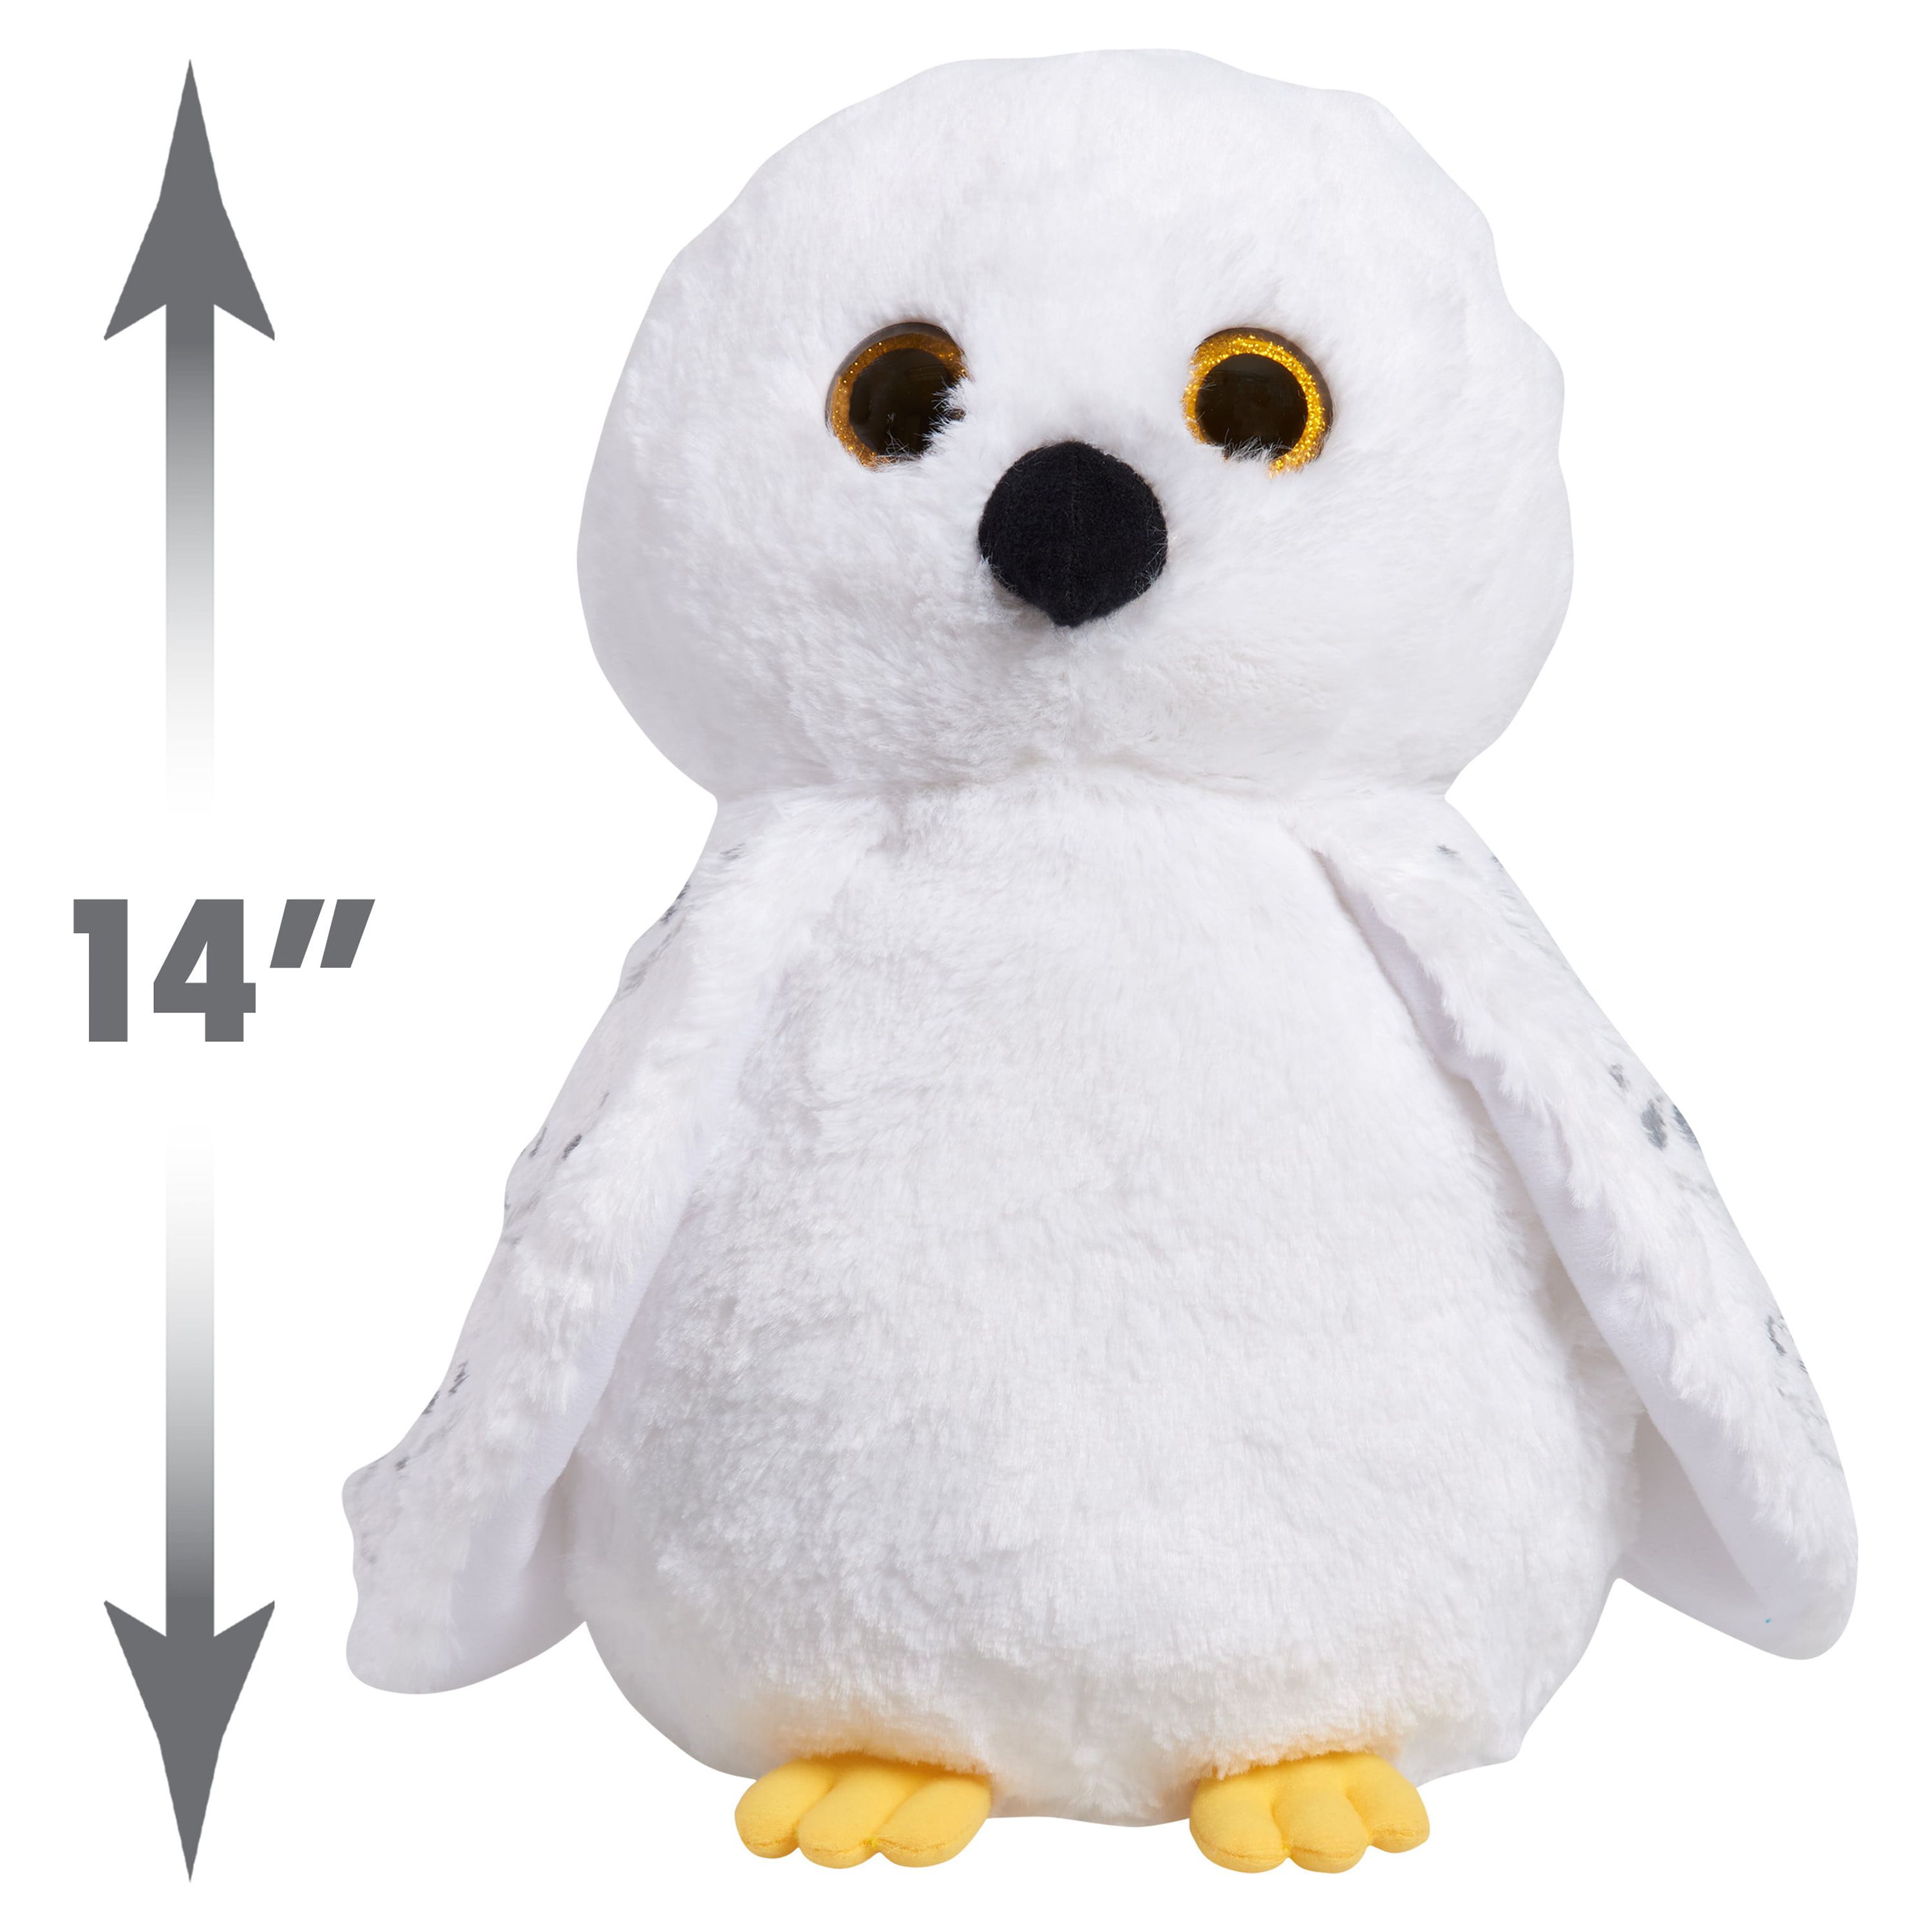 Harry Potter Collector Hedwig Plush Stuffed Owl Toy for Kids, White, Snowy Owl,  Kids Toys for Ages 3 Up, Gifts and Presents - image 3 of 4